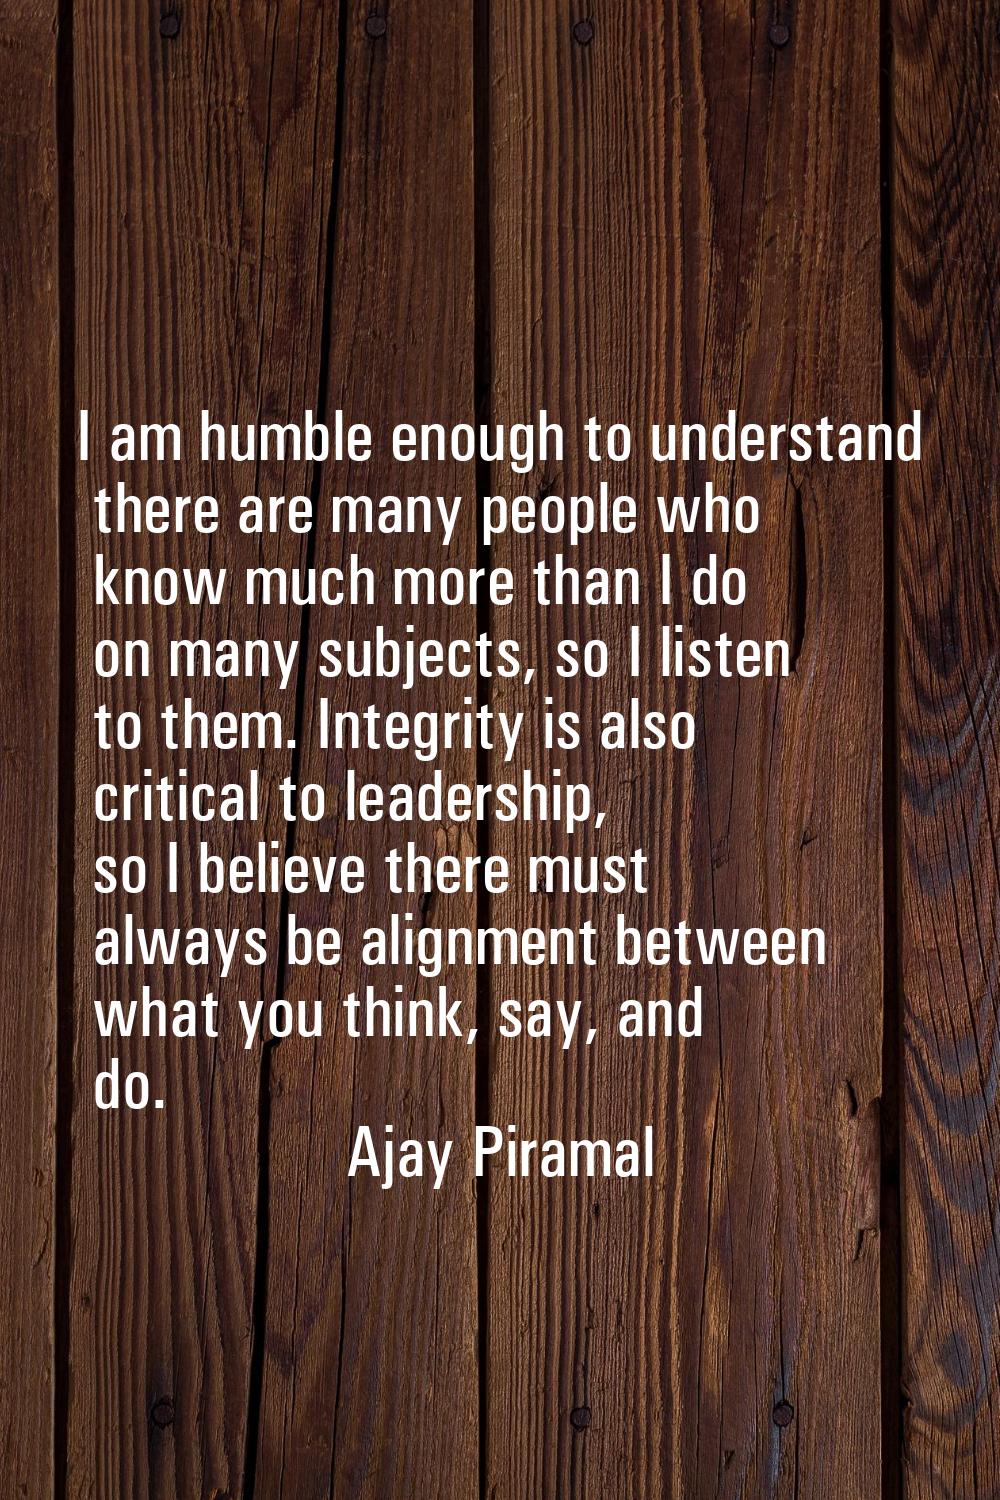 I am humble enough to understand there are many people who know much more than I do on many subject